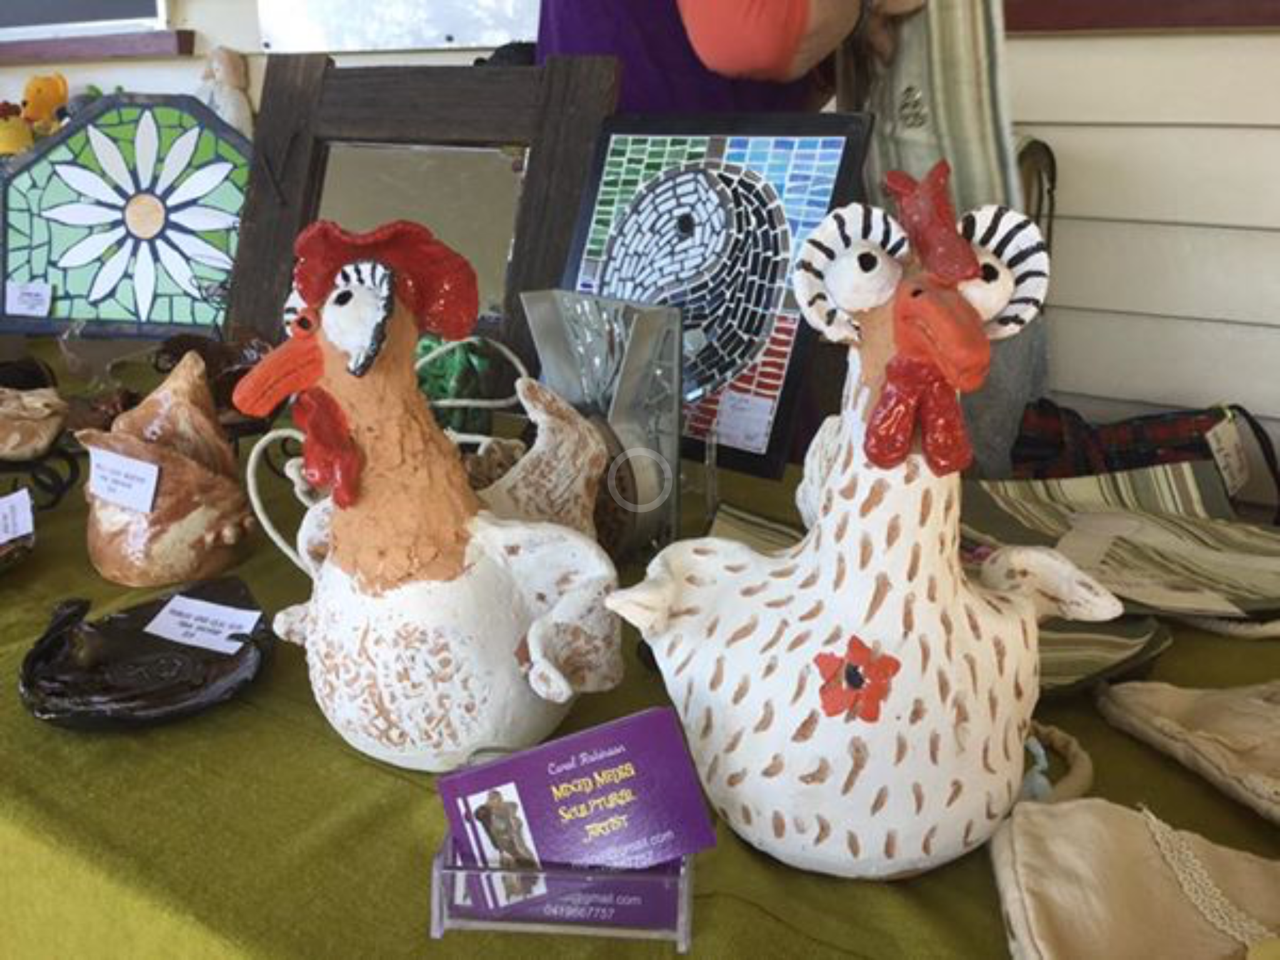 Art Market items for sale at the Kilcoy Courthouse Art Gallery